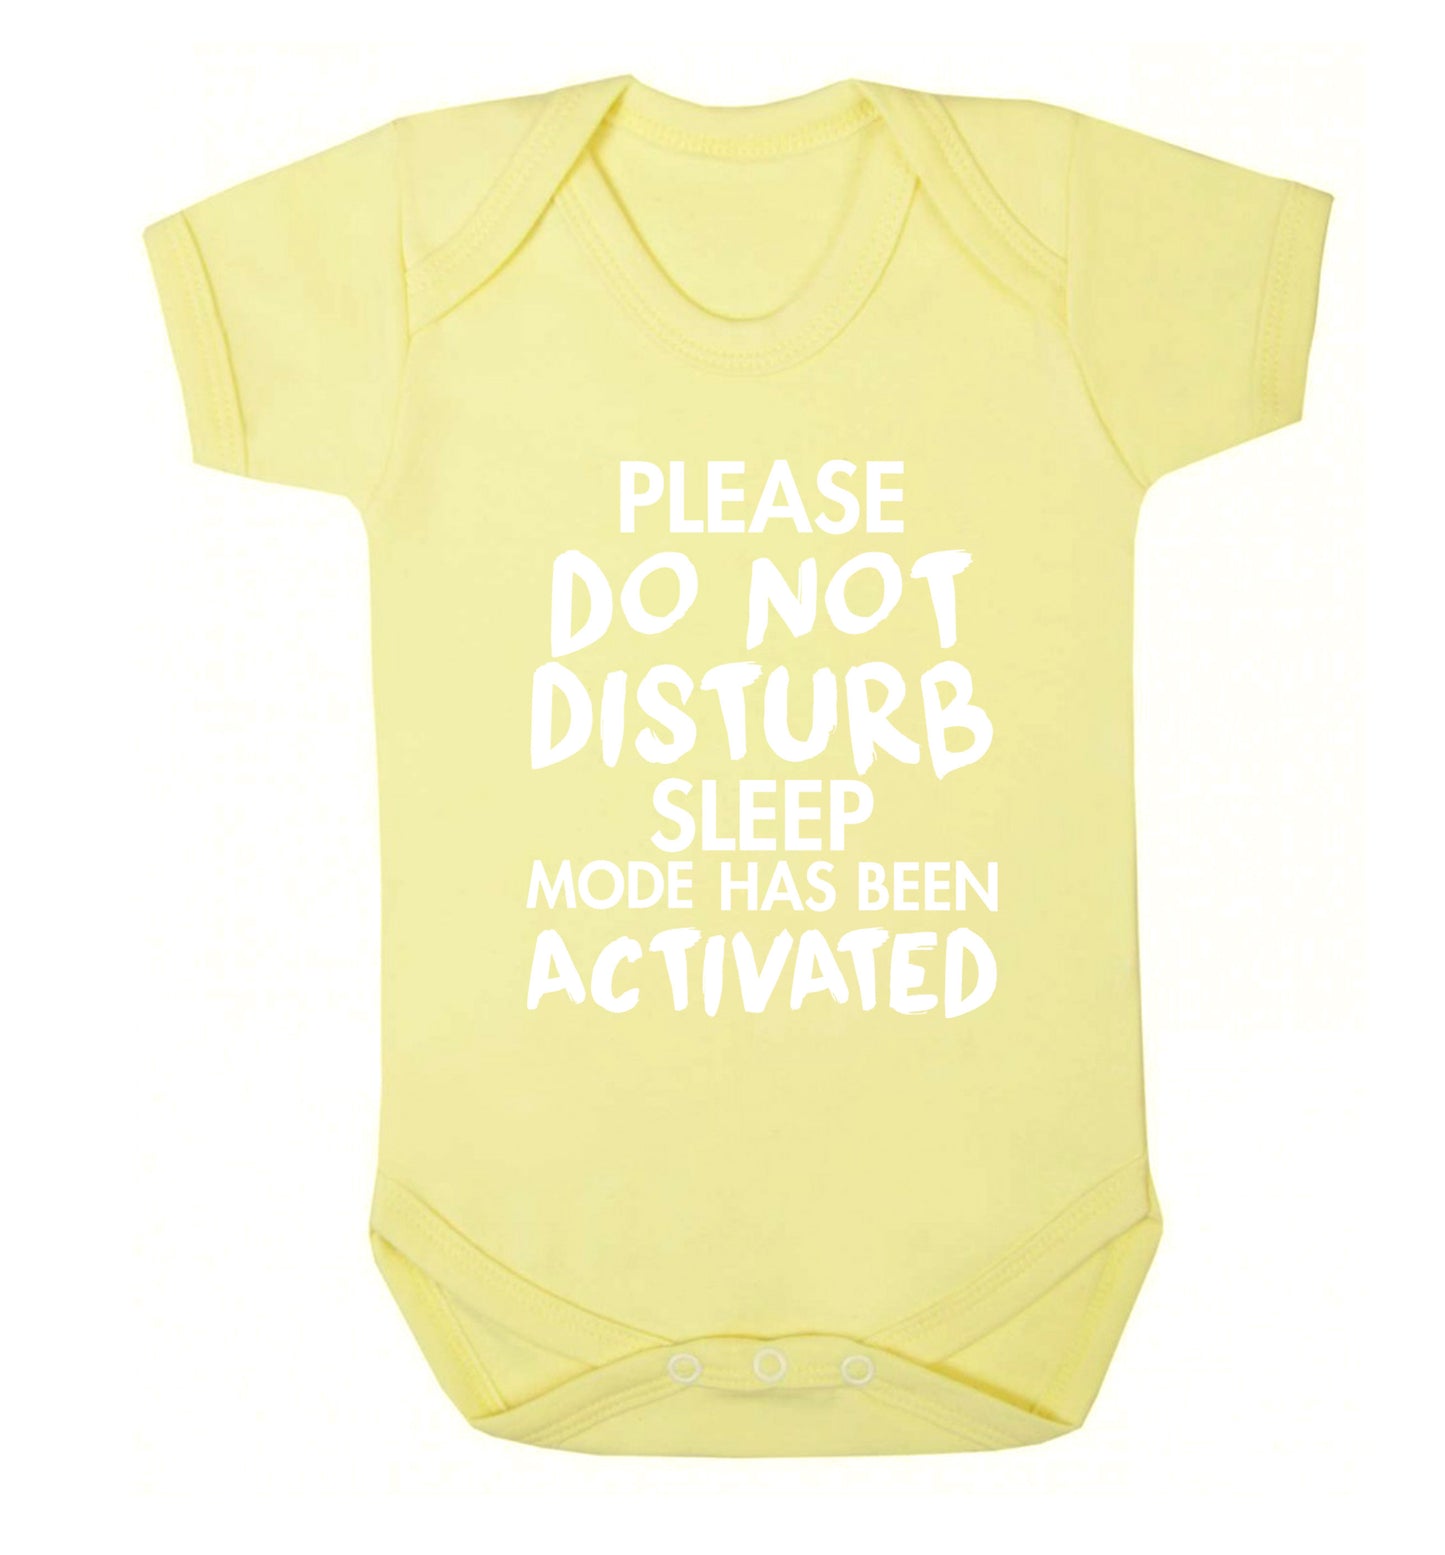 Please do not disturb sleeping mode has been activated Baby Vest pale yellow 18-24 months